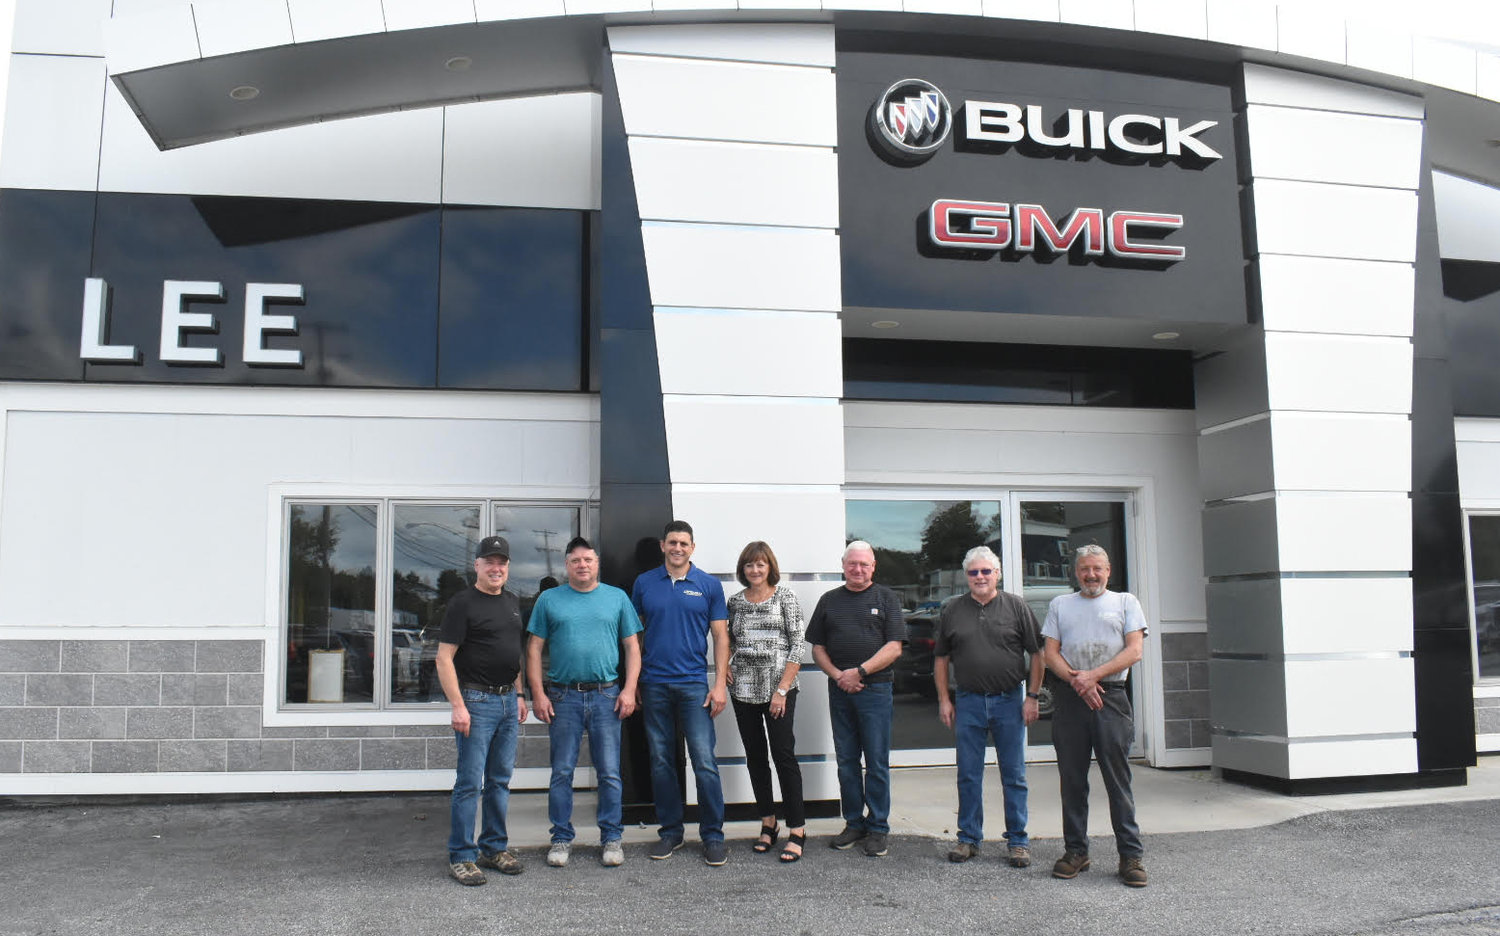 Steering a new course into the future, Matt Nimey Buick GMC has announced that it has acquired Lee Buick GMC Trucks, effective Monday, Sept. 19. From left: Randy Lee, Robert Lee, Matt Nimey, Cindy Nimey, Rick Lee, Michael Lee, and Rodney Lee. The Lee brothers are the sons of Gladys and the late Dick Lee, who founded the business with his father Gus Lee in the early 1960s.